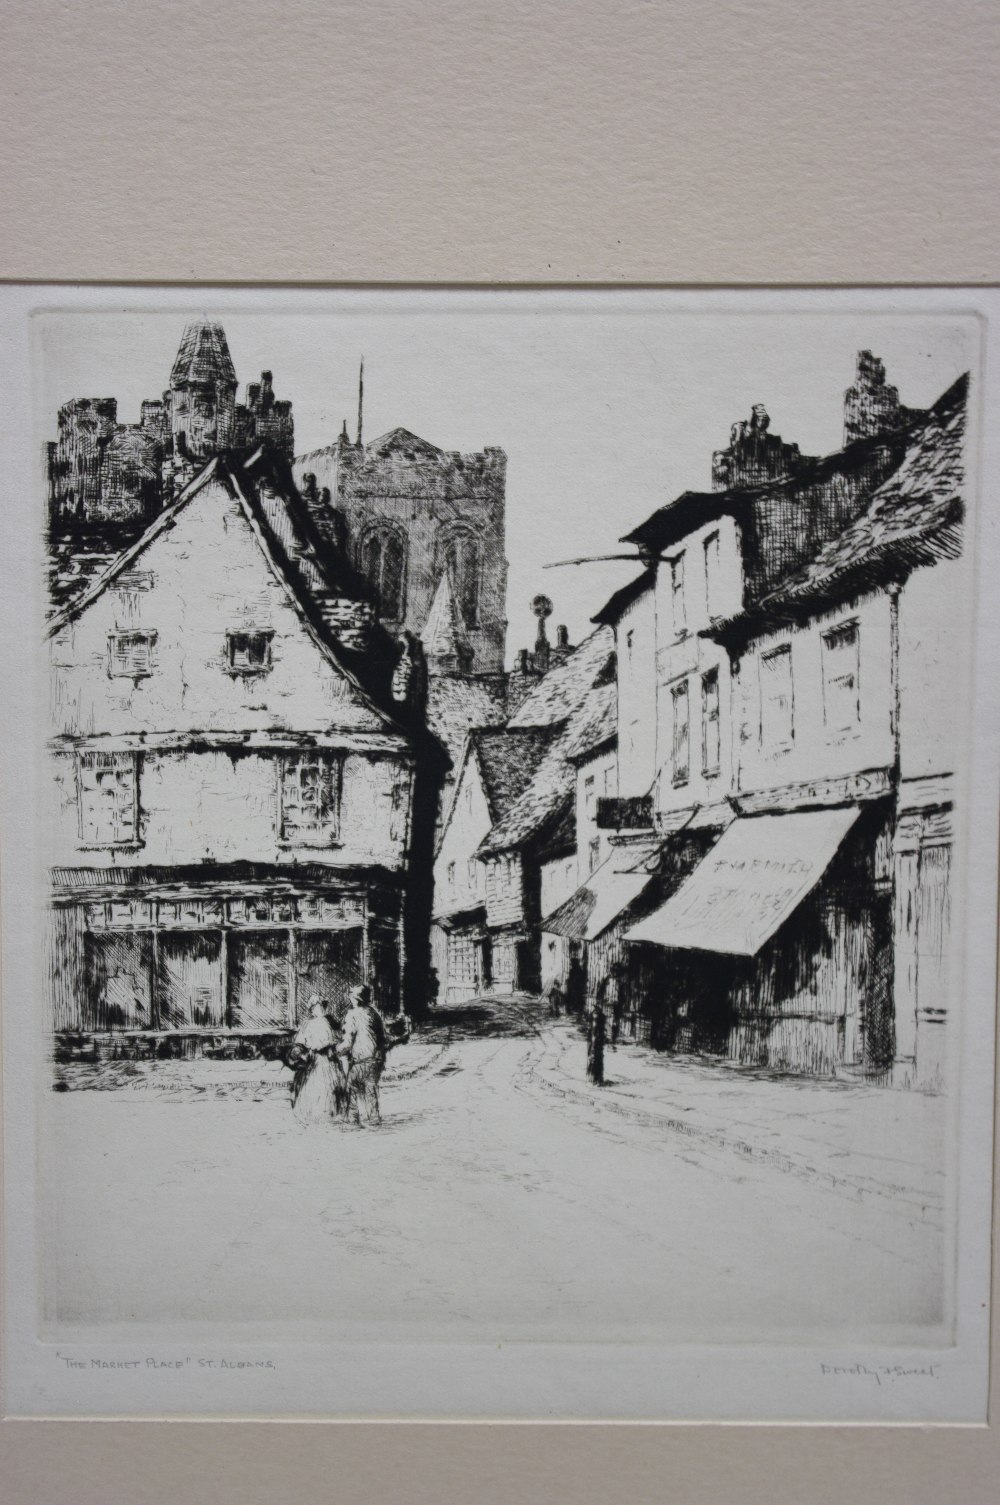 DOROTHY F. SWEET. A black-&-white etching titled: “The Market Place, St. Albans”, signed in